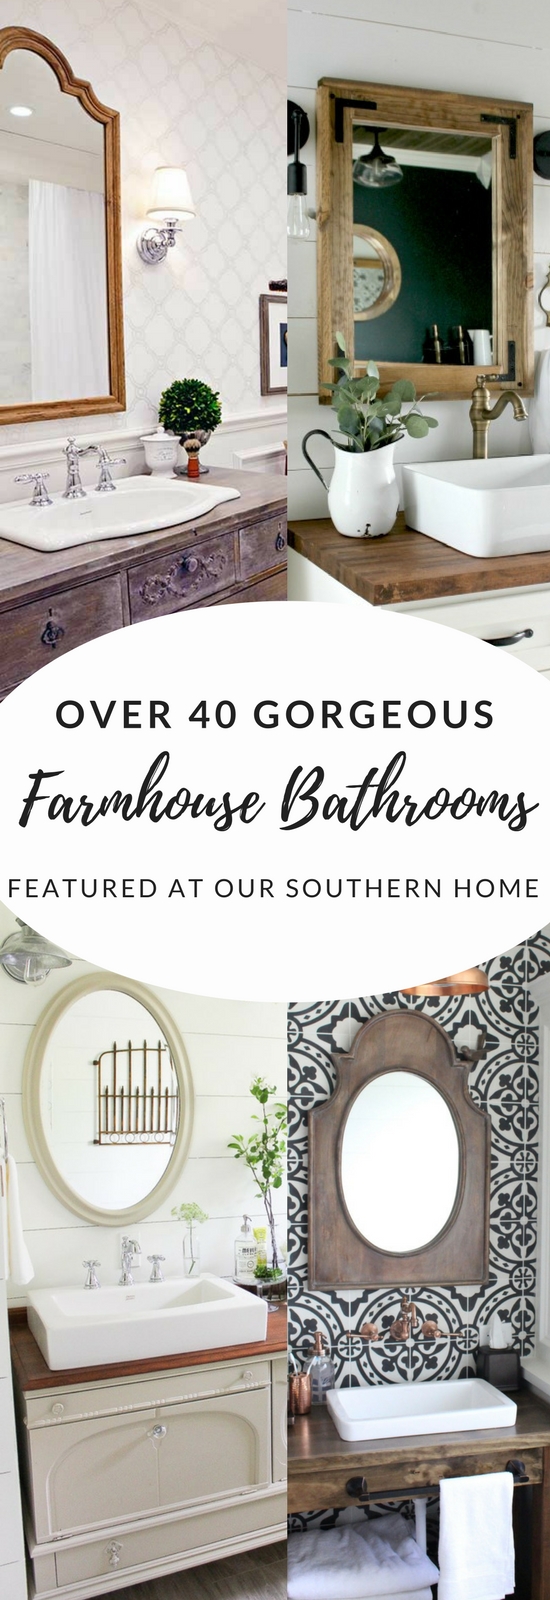 Over 40 gorgeous farmhouse bathroom ideas from the simple makeover to full remodel. There is a little something for every budget. #farmhousebathroom #bathroommakeover #bathroomideas